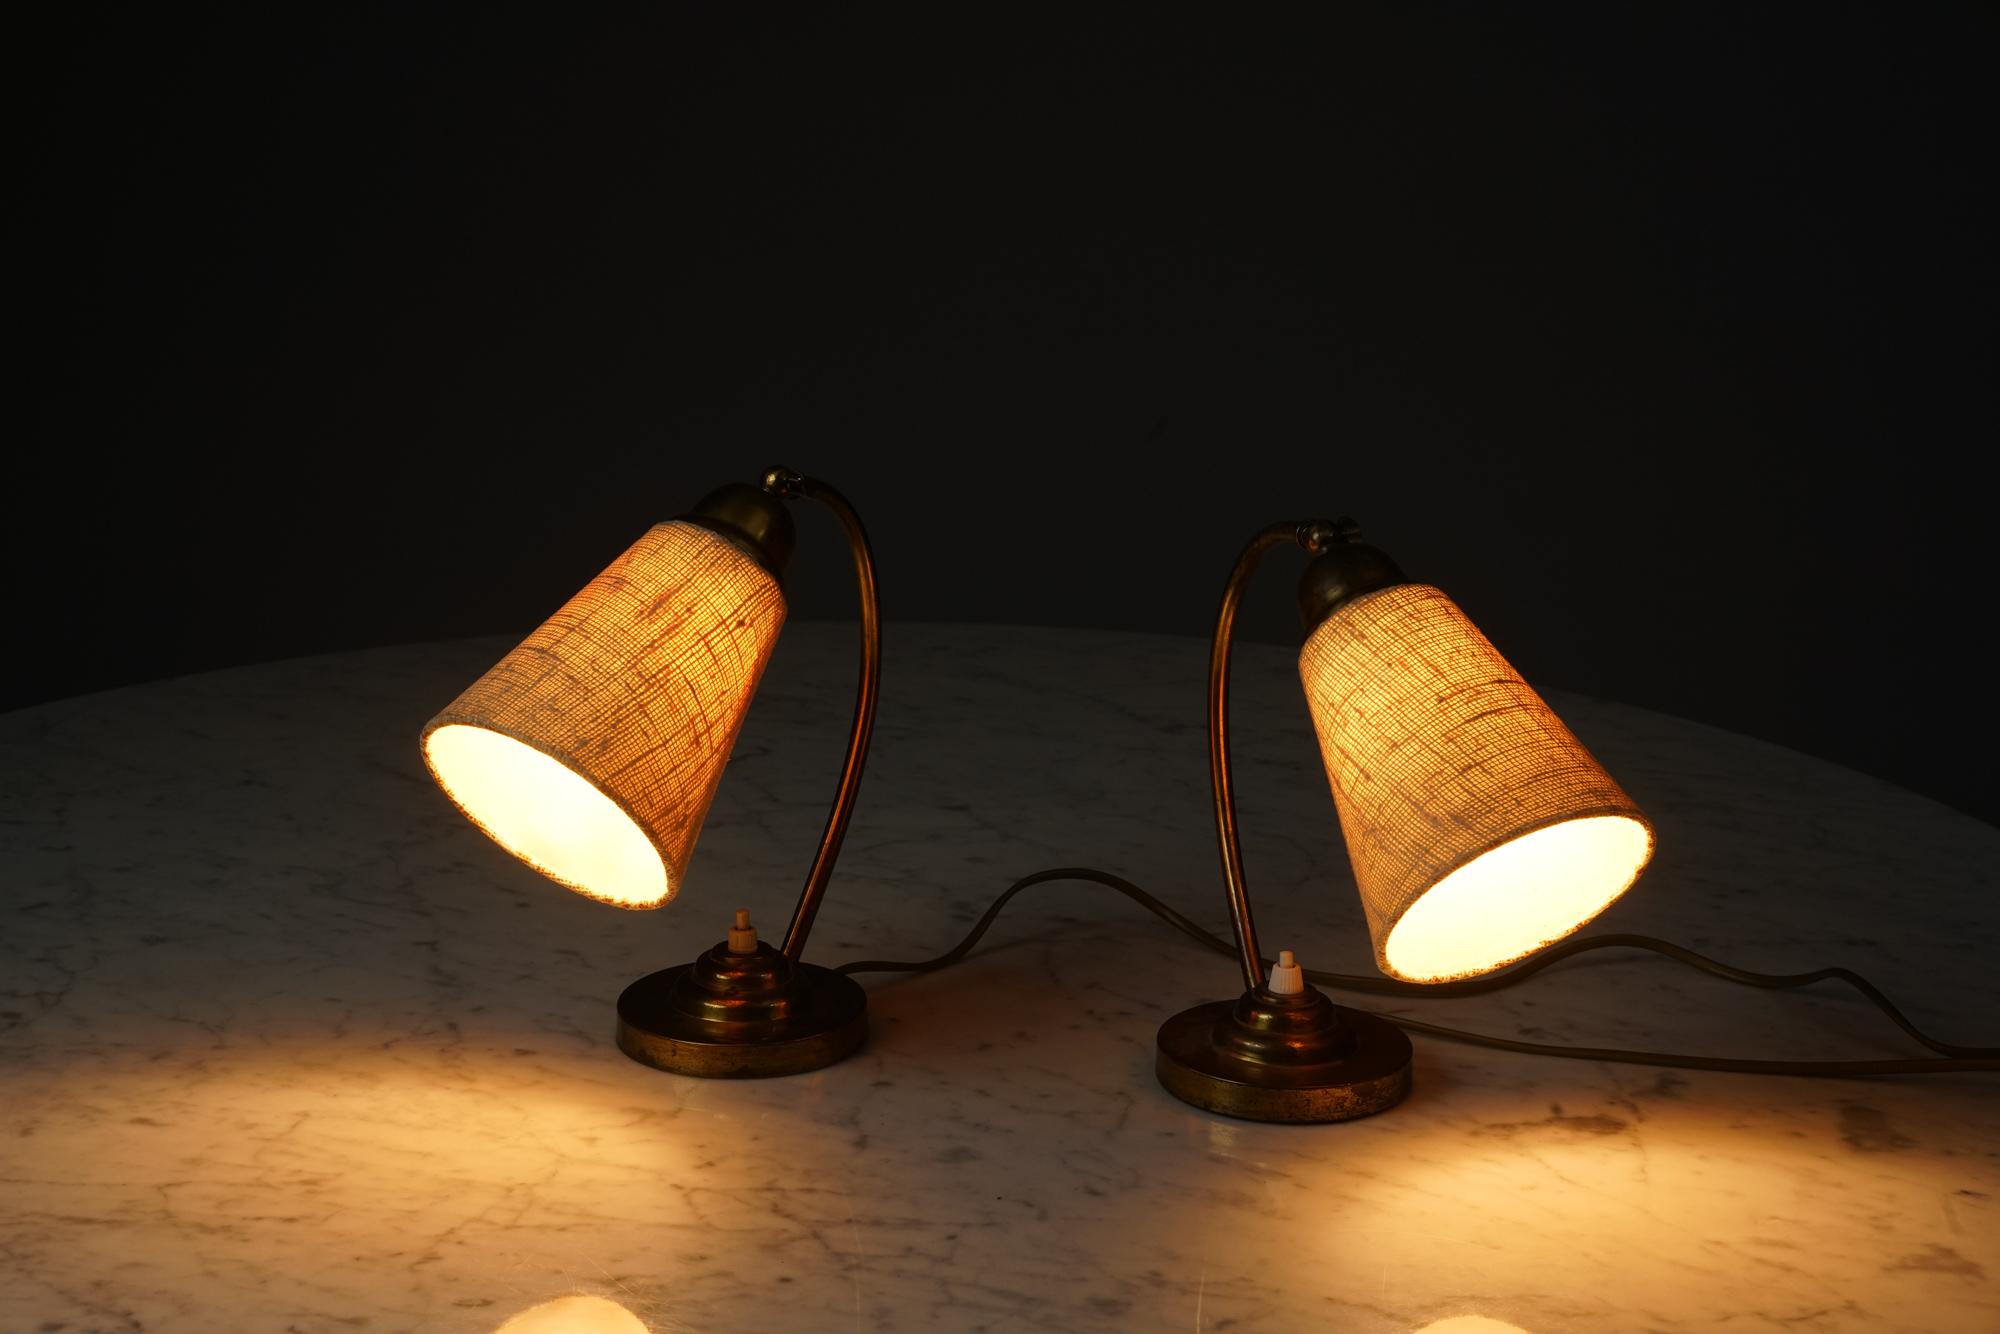 Mid-Century Modern Paavo Tynell style brass table lamps from the 1940s/1950s. Sold as Set of two.

Brass frame and fabric lampshade. Most likely manufactured by Idman Oy or Itsu. 
Beautiful classic Scandinavian modern design. Good vintage condition,